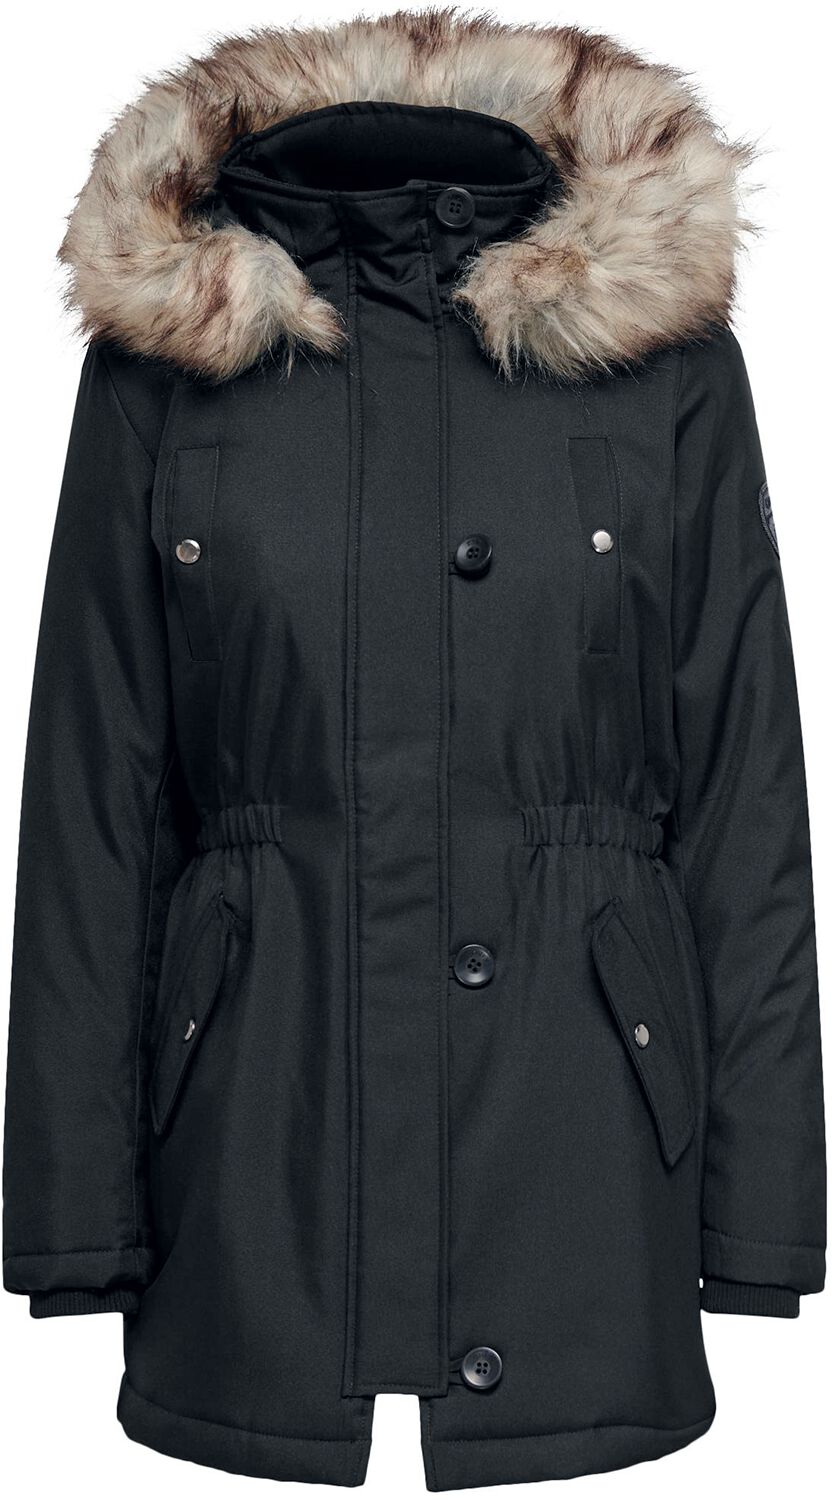 Image of Giacca invernale di Only - Iris Fur Winter Parka - XS a M - Donna - nero